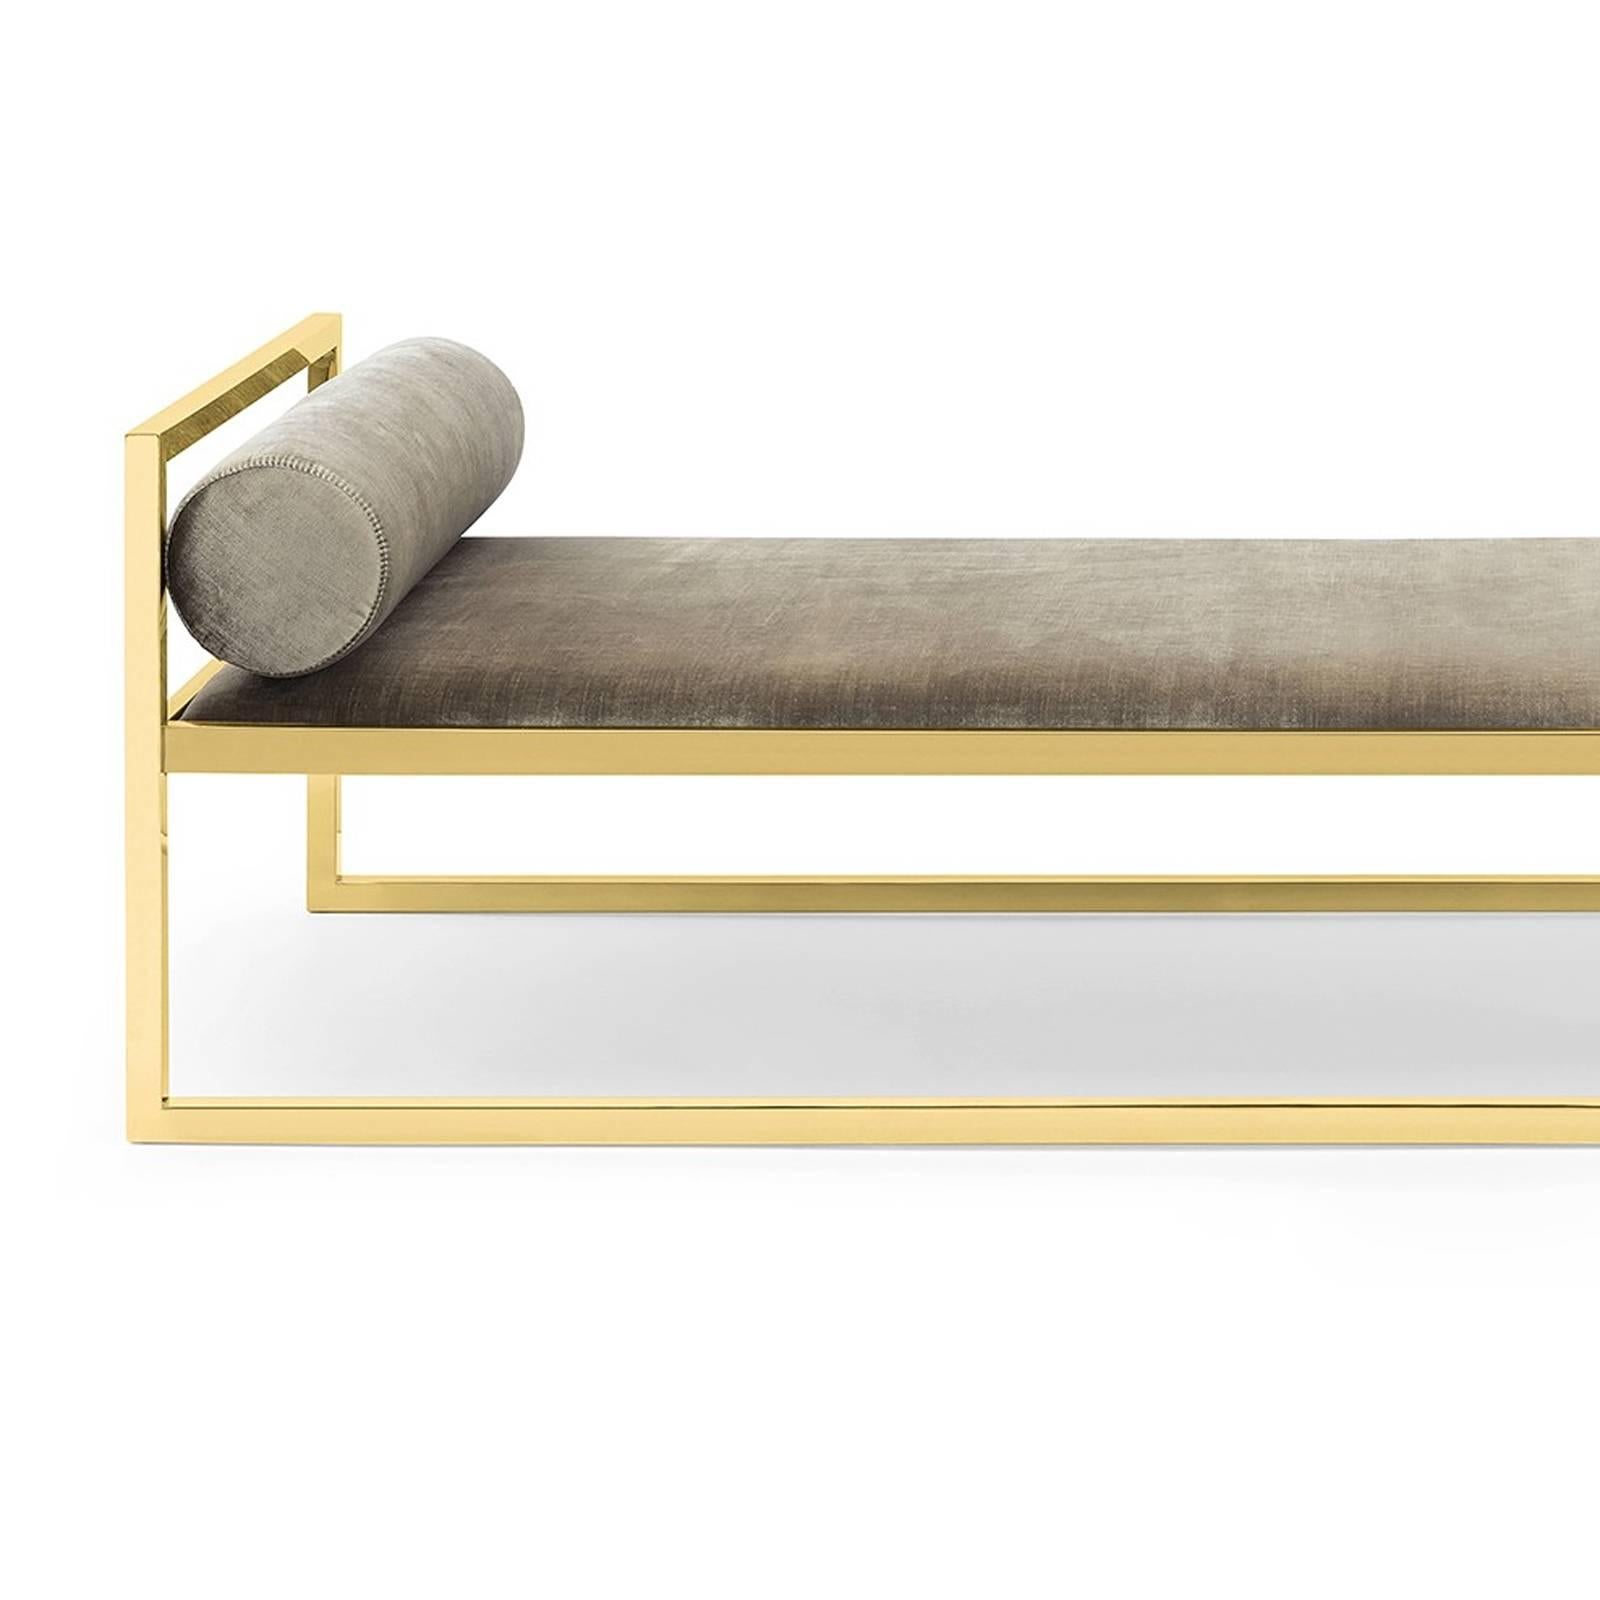 Daybed Grand Avenue with structure in gold
finish stainless steel. Upholstered with grey velvet
fabric, fire retardant treatment. Also available with
polished stainless steel structure and available
upholstered with genuine bitten leather